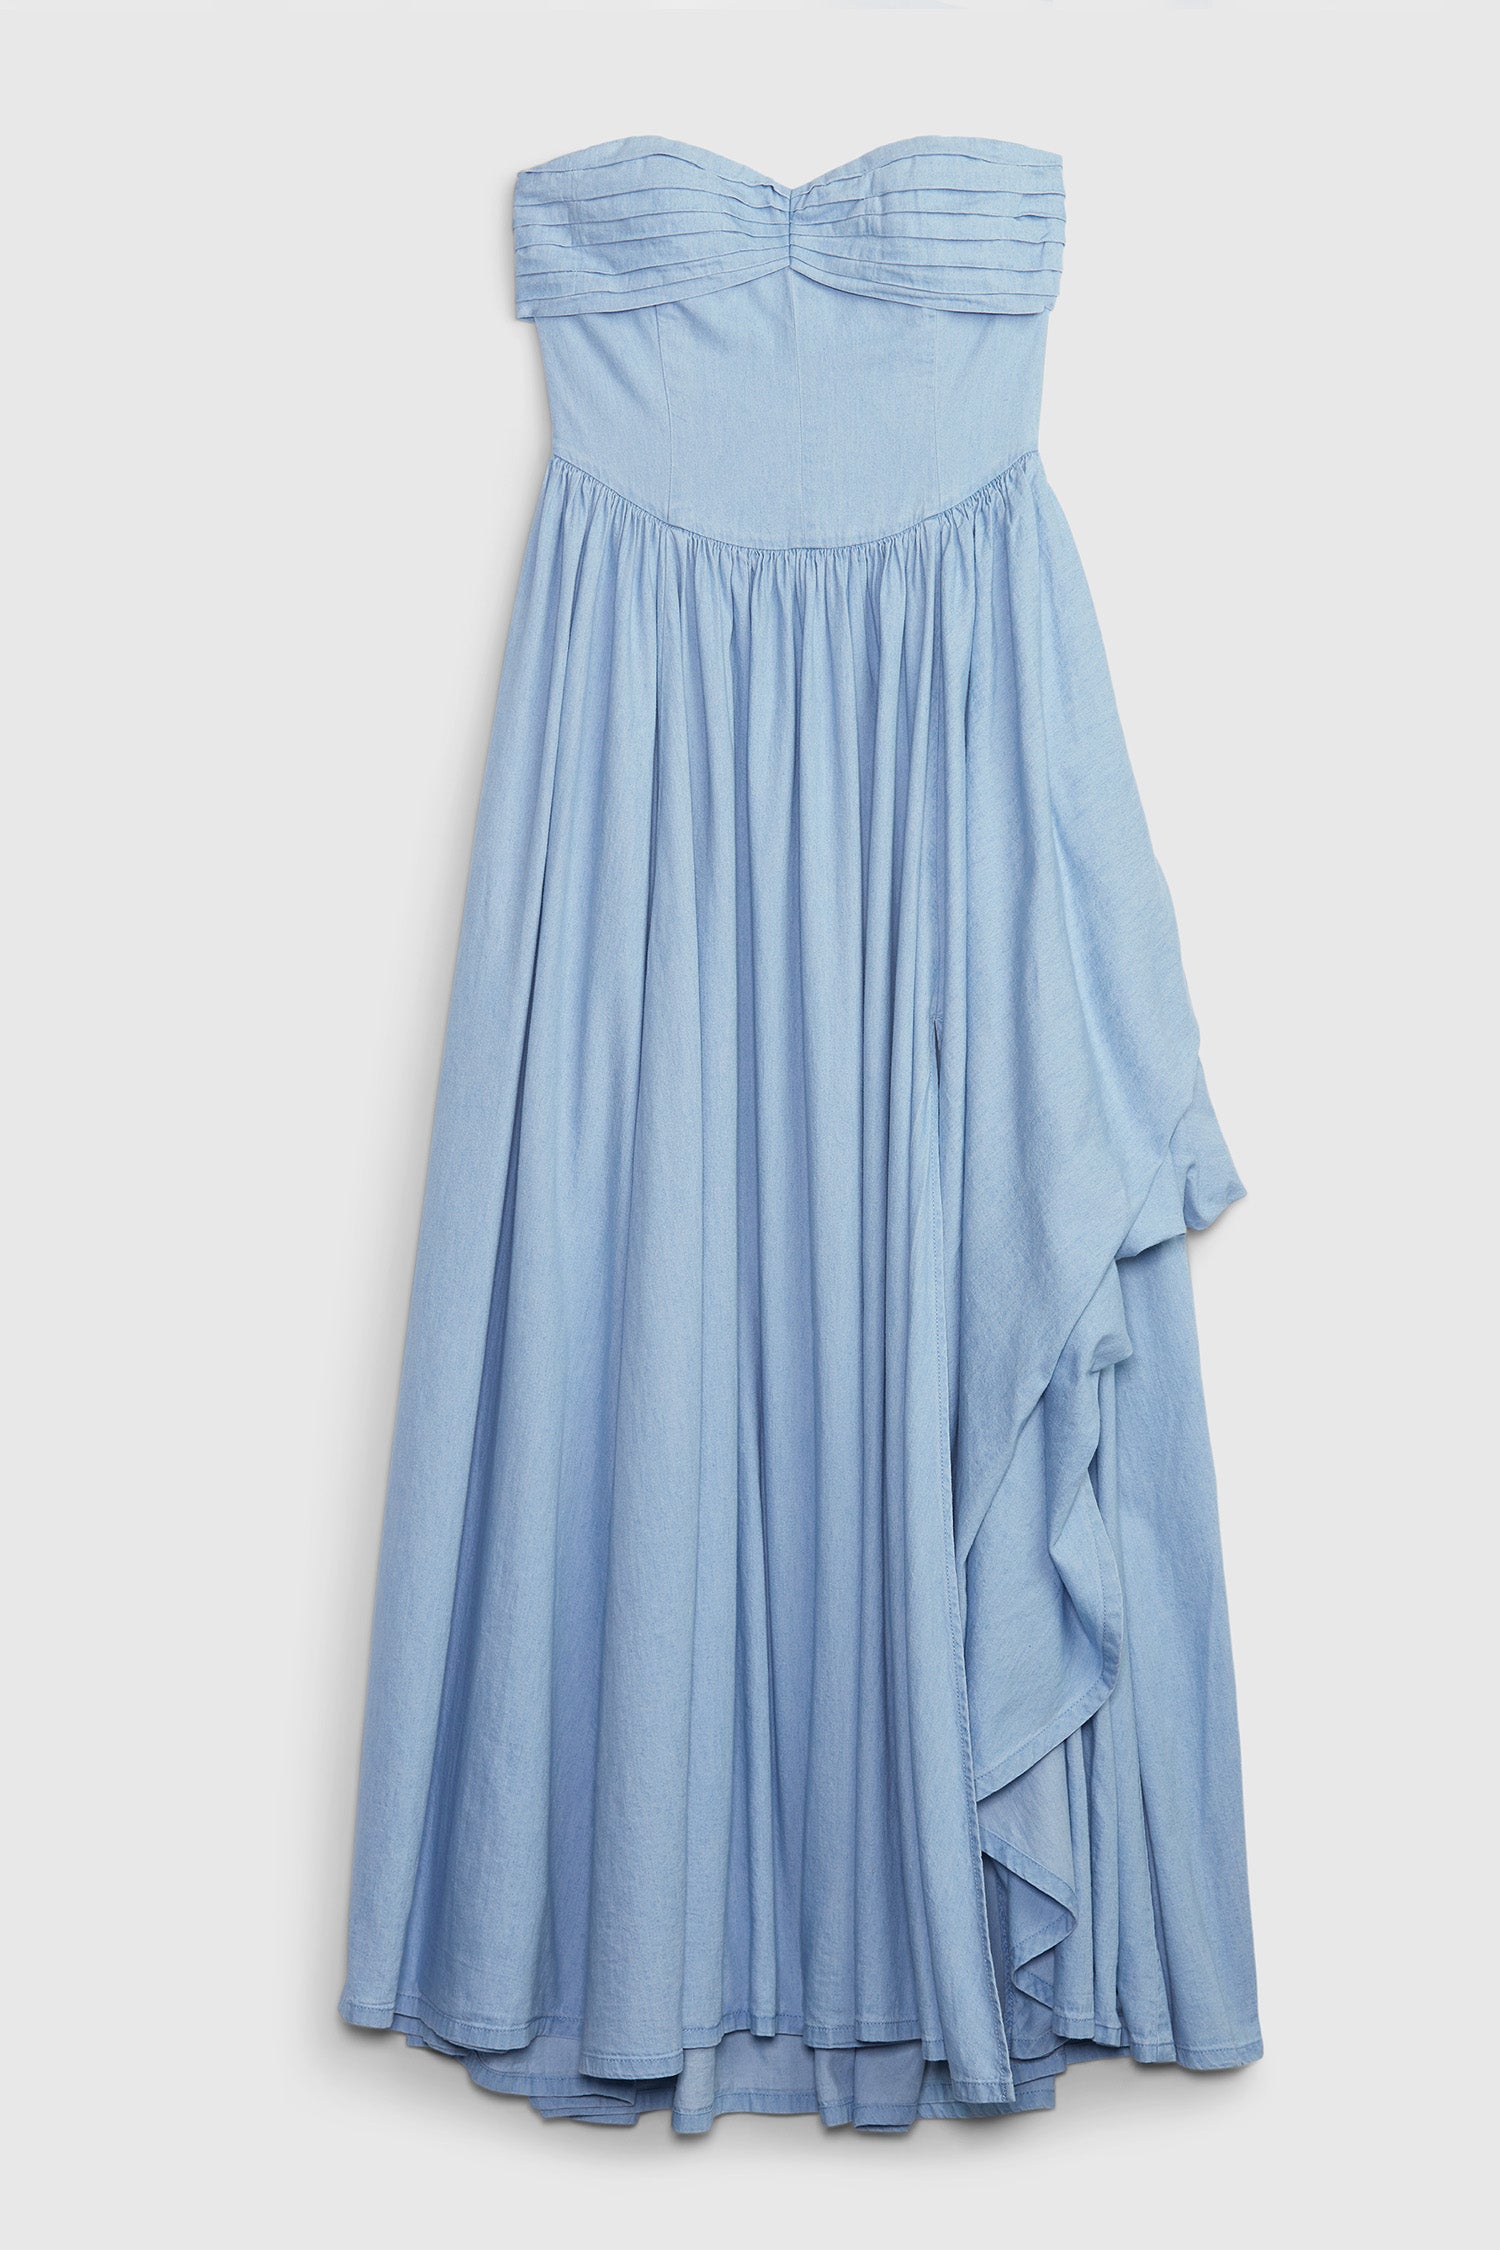 Bue denim strapless maxi dress with corset top and tiered skirt